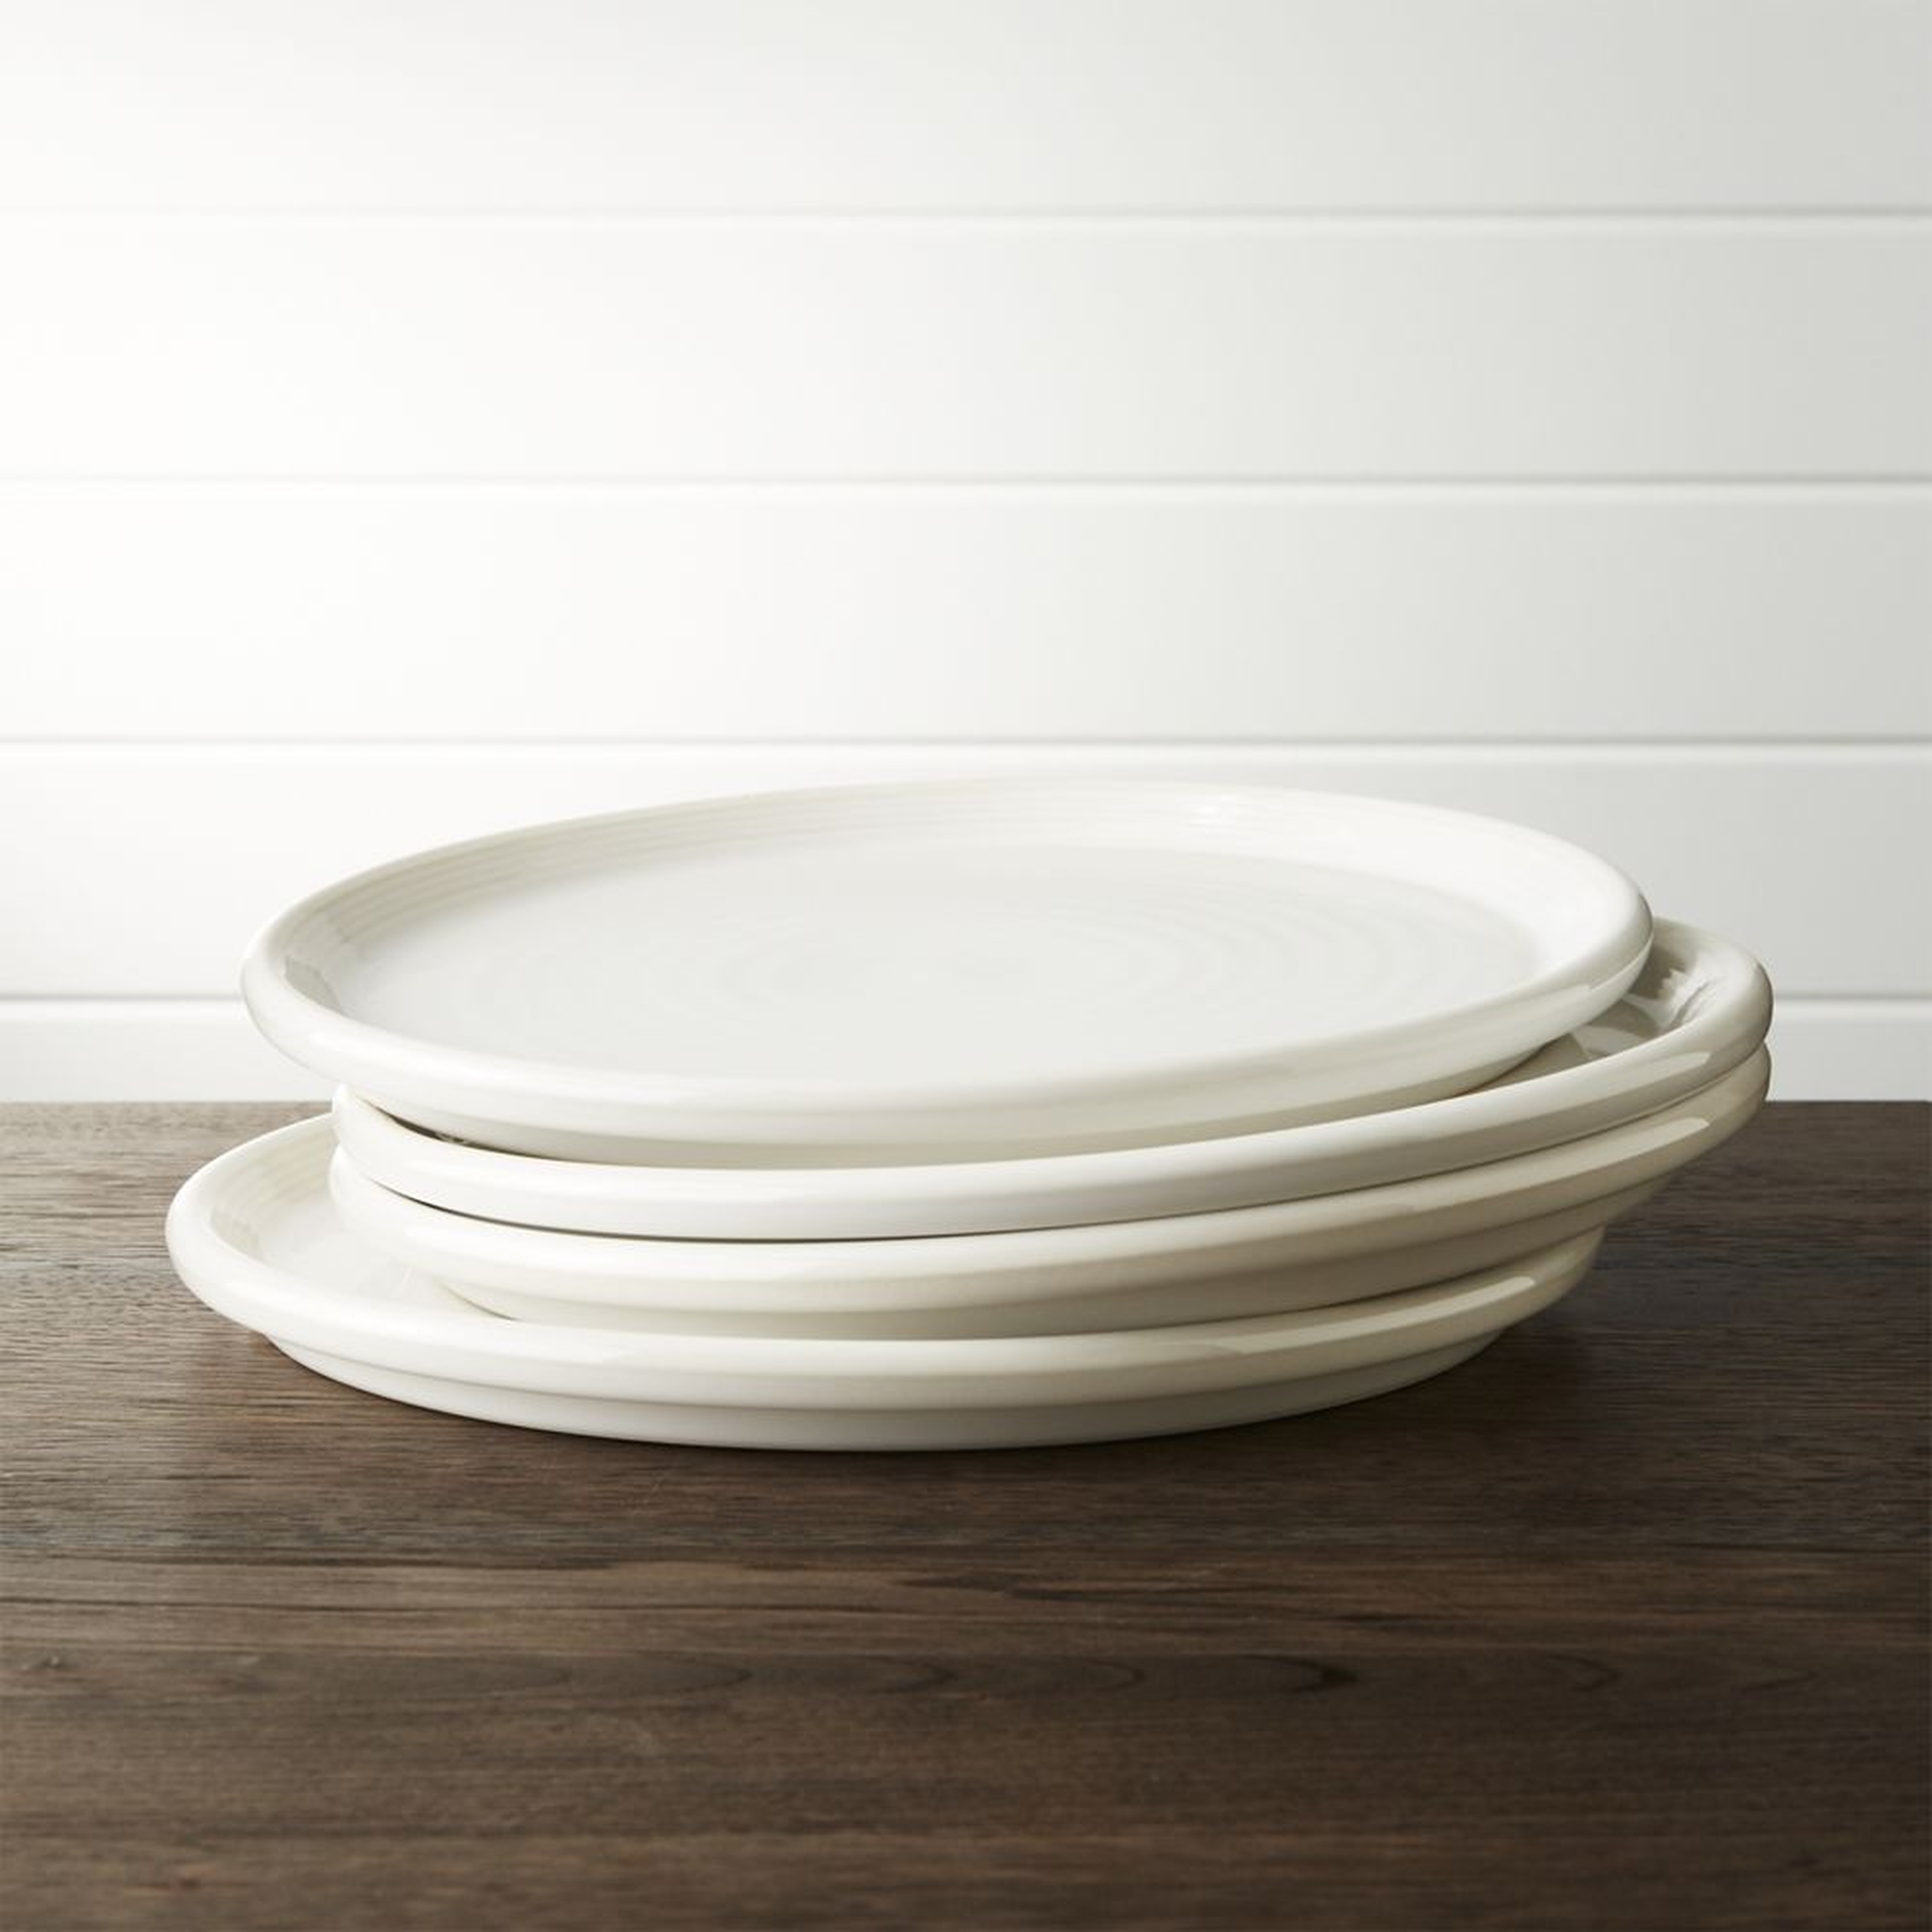 Farmhouse White Dinner Plates, Set of 4 - Crate and Barrel